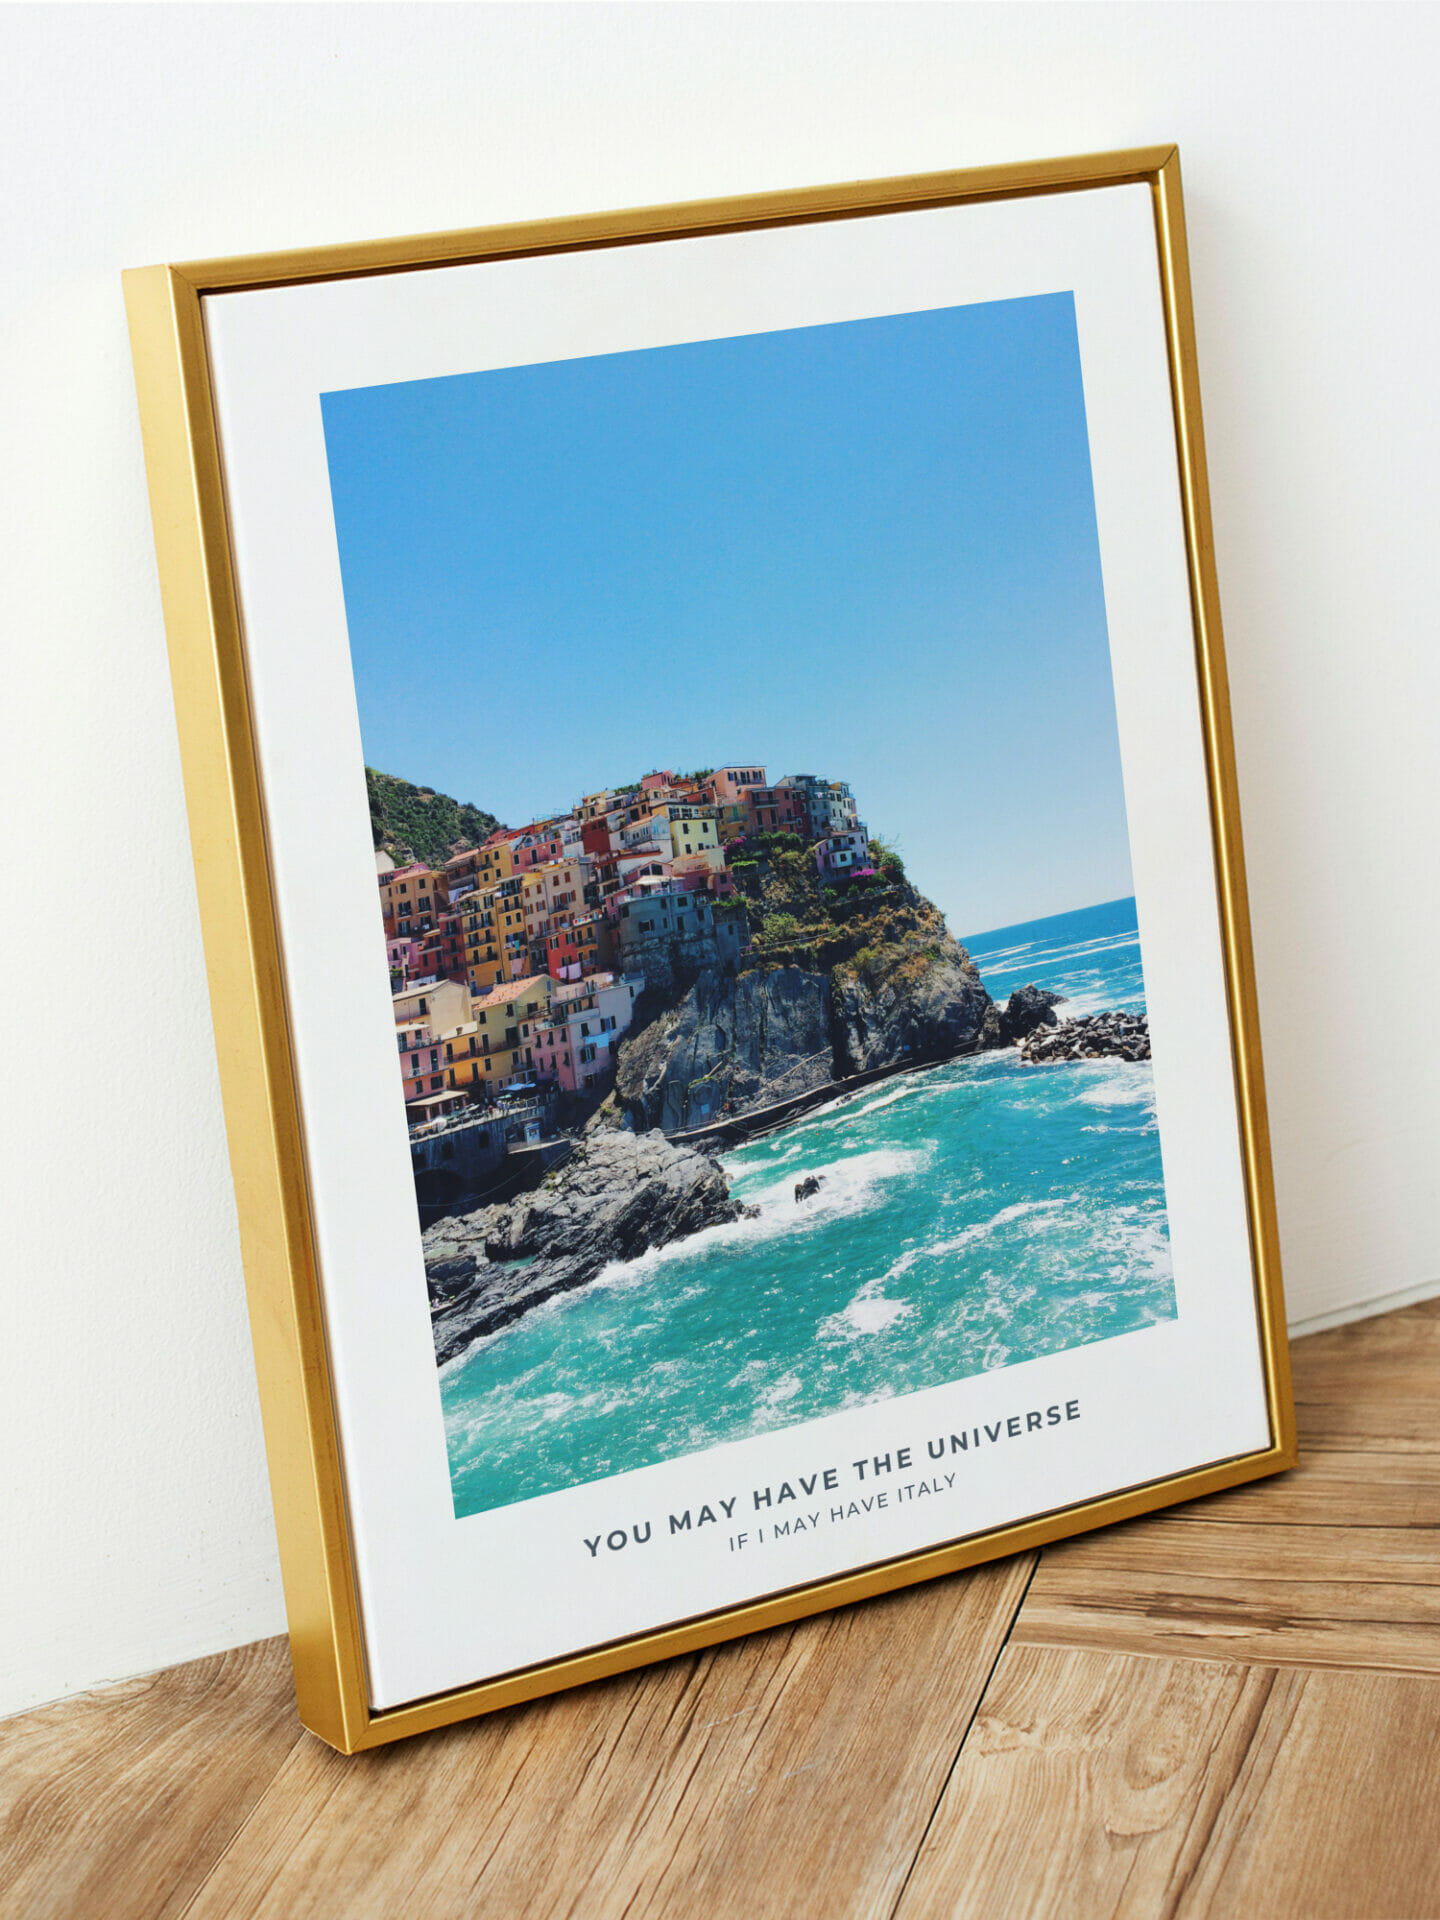 Poster of city of Cinque Terre by the sea in interior